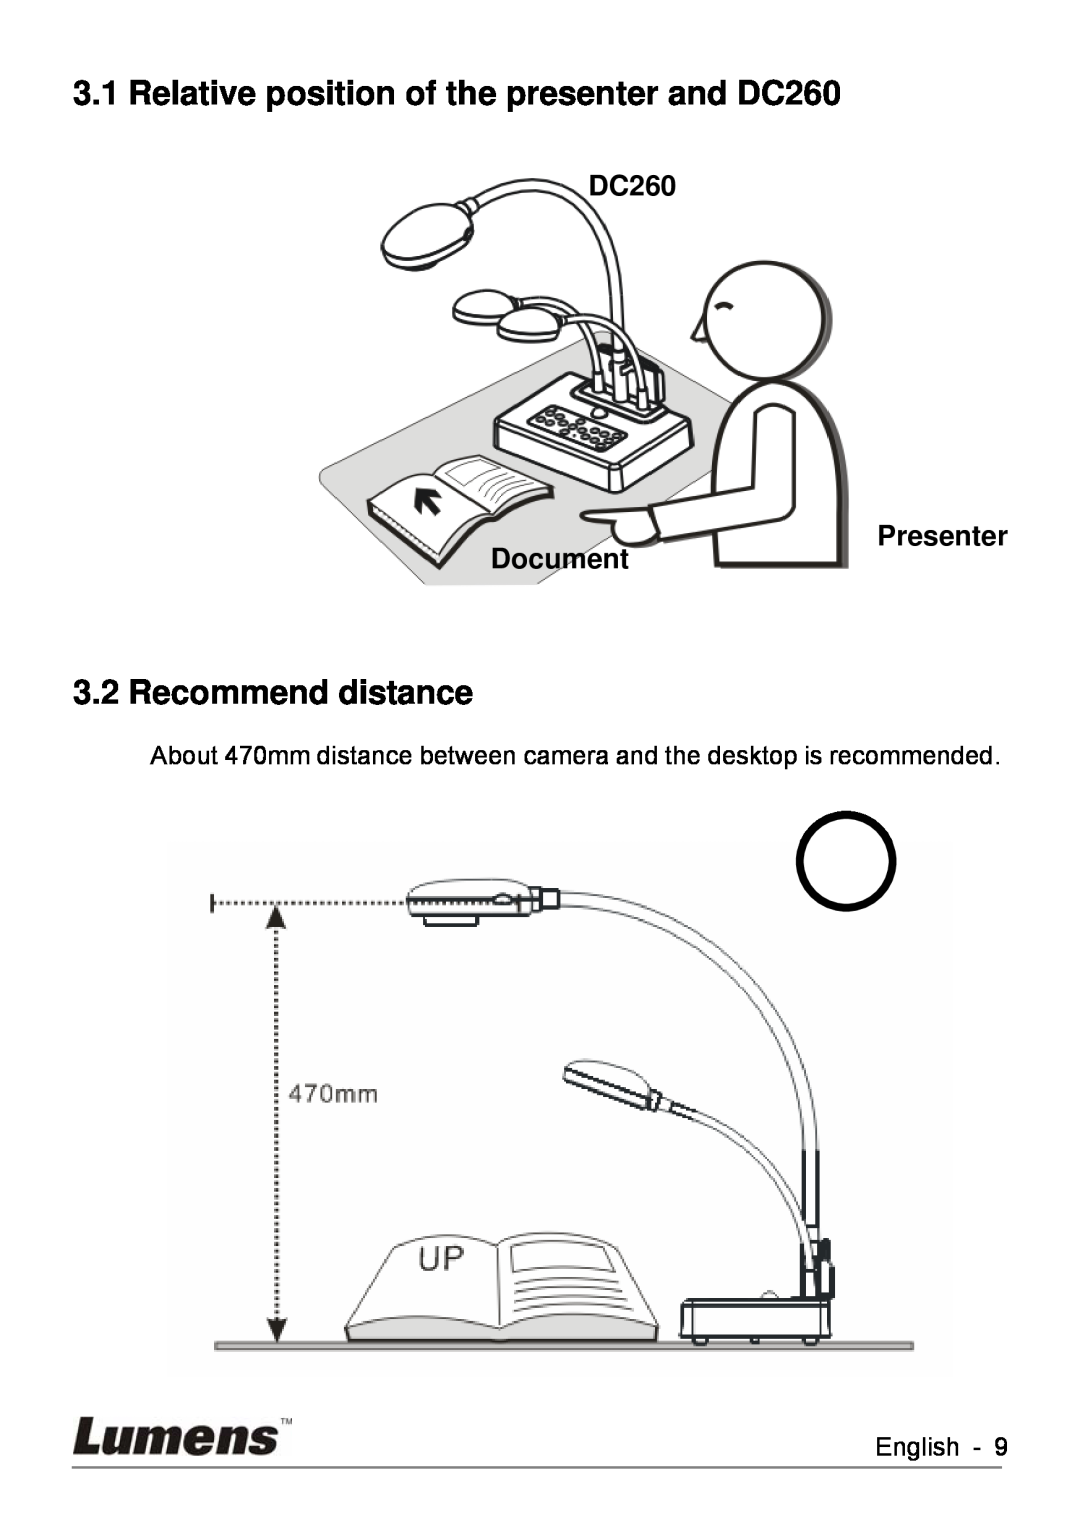 Lumens Technology user manual Relative position of the presenter and DC260, Recommend distance, Document, Presenter 